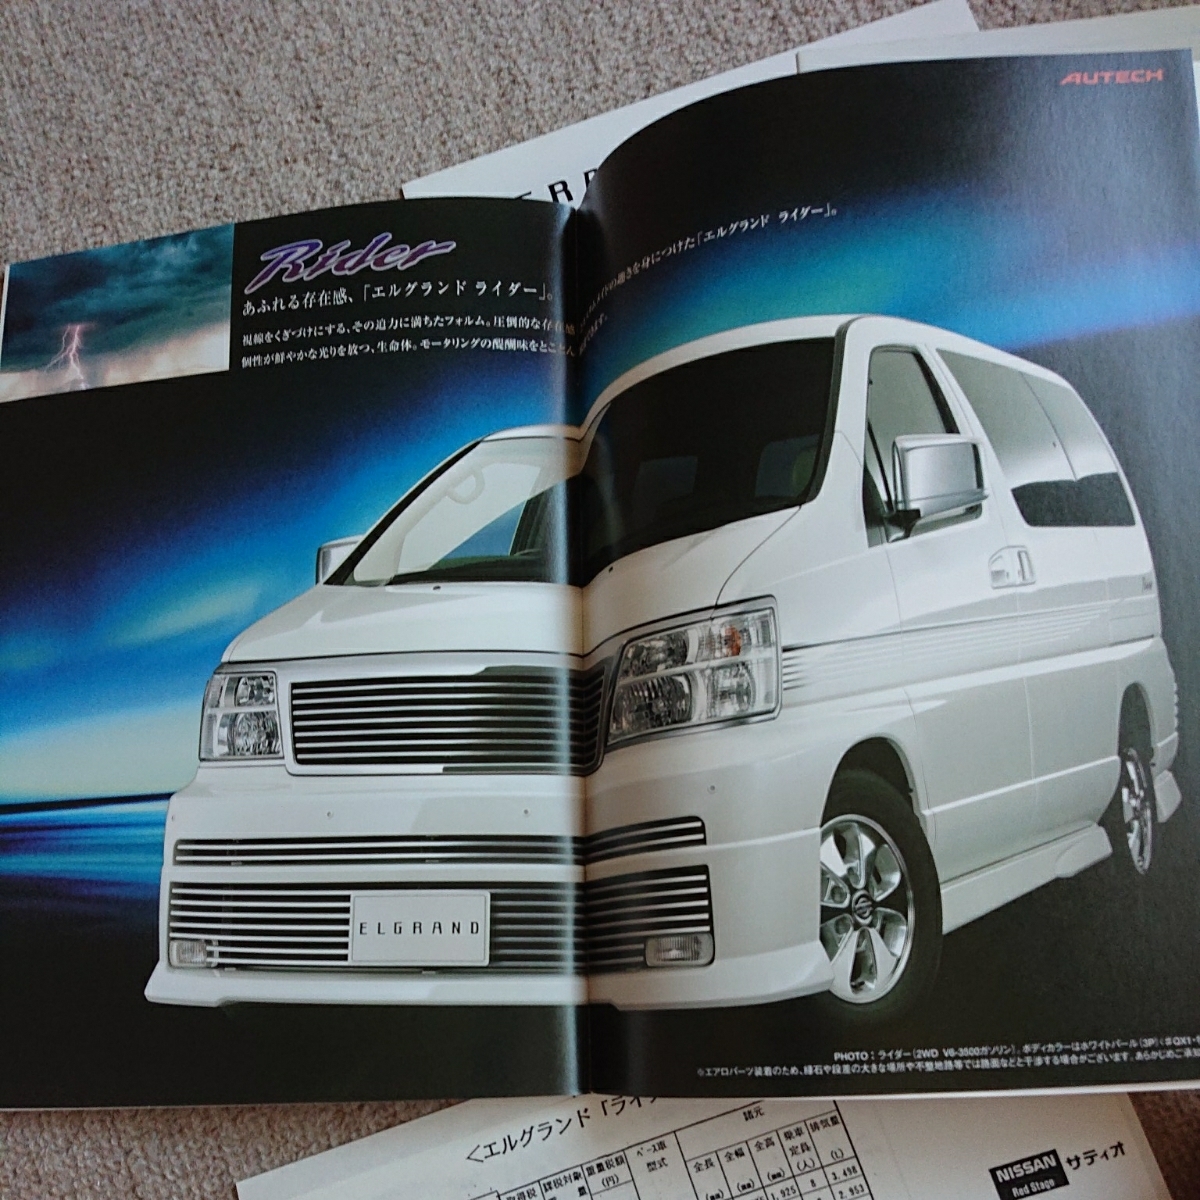  records out of production,2001 year 11 month issue, model GH-APE50,KH-ATE50,GH-APWE50,KH-ATWE50, Nissan Elgrand main catalog, option catalog etc., set 